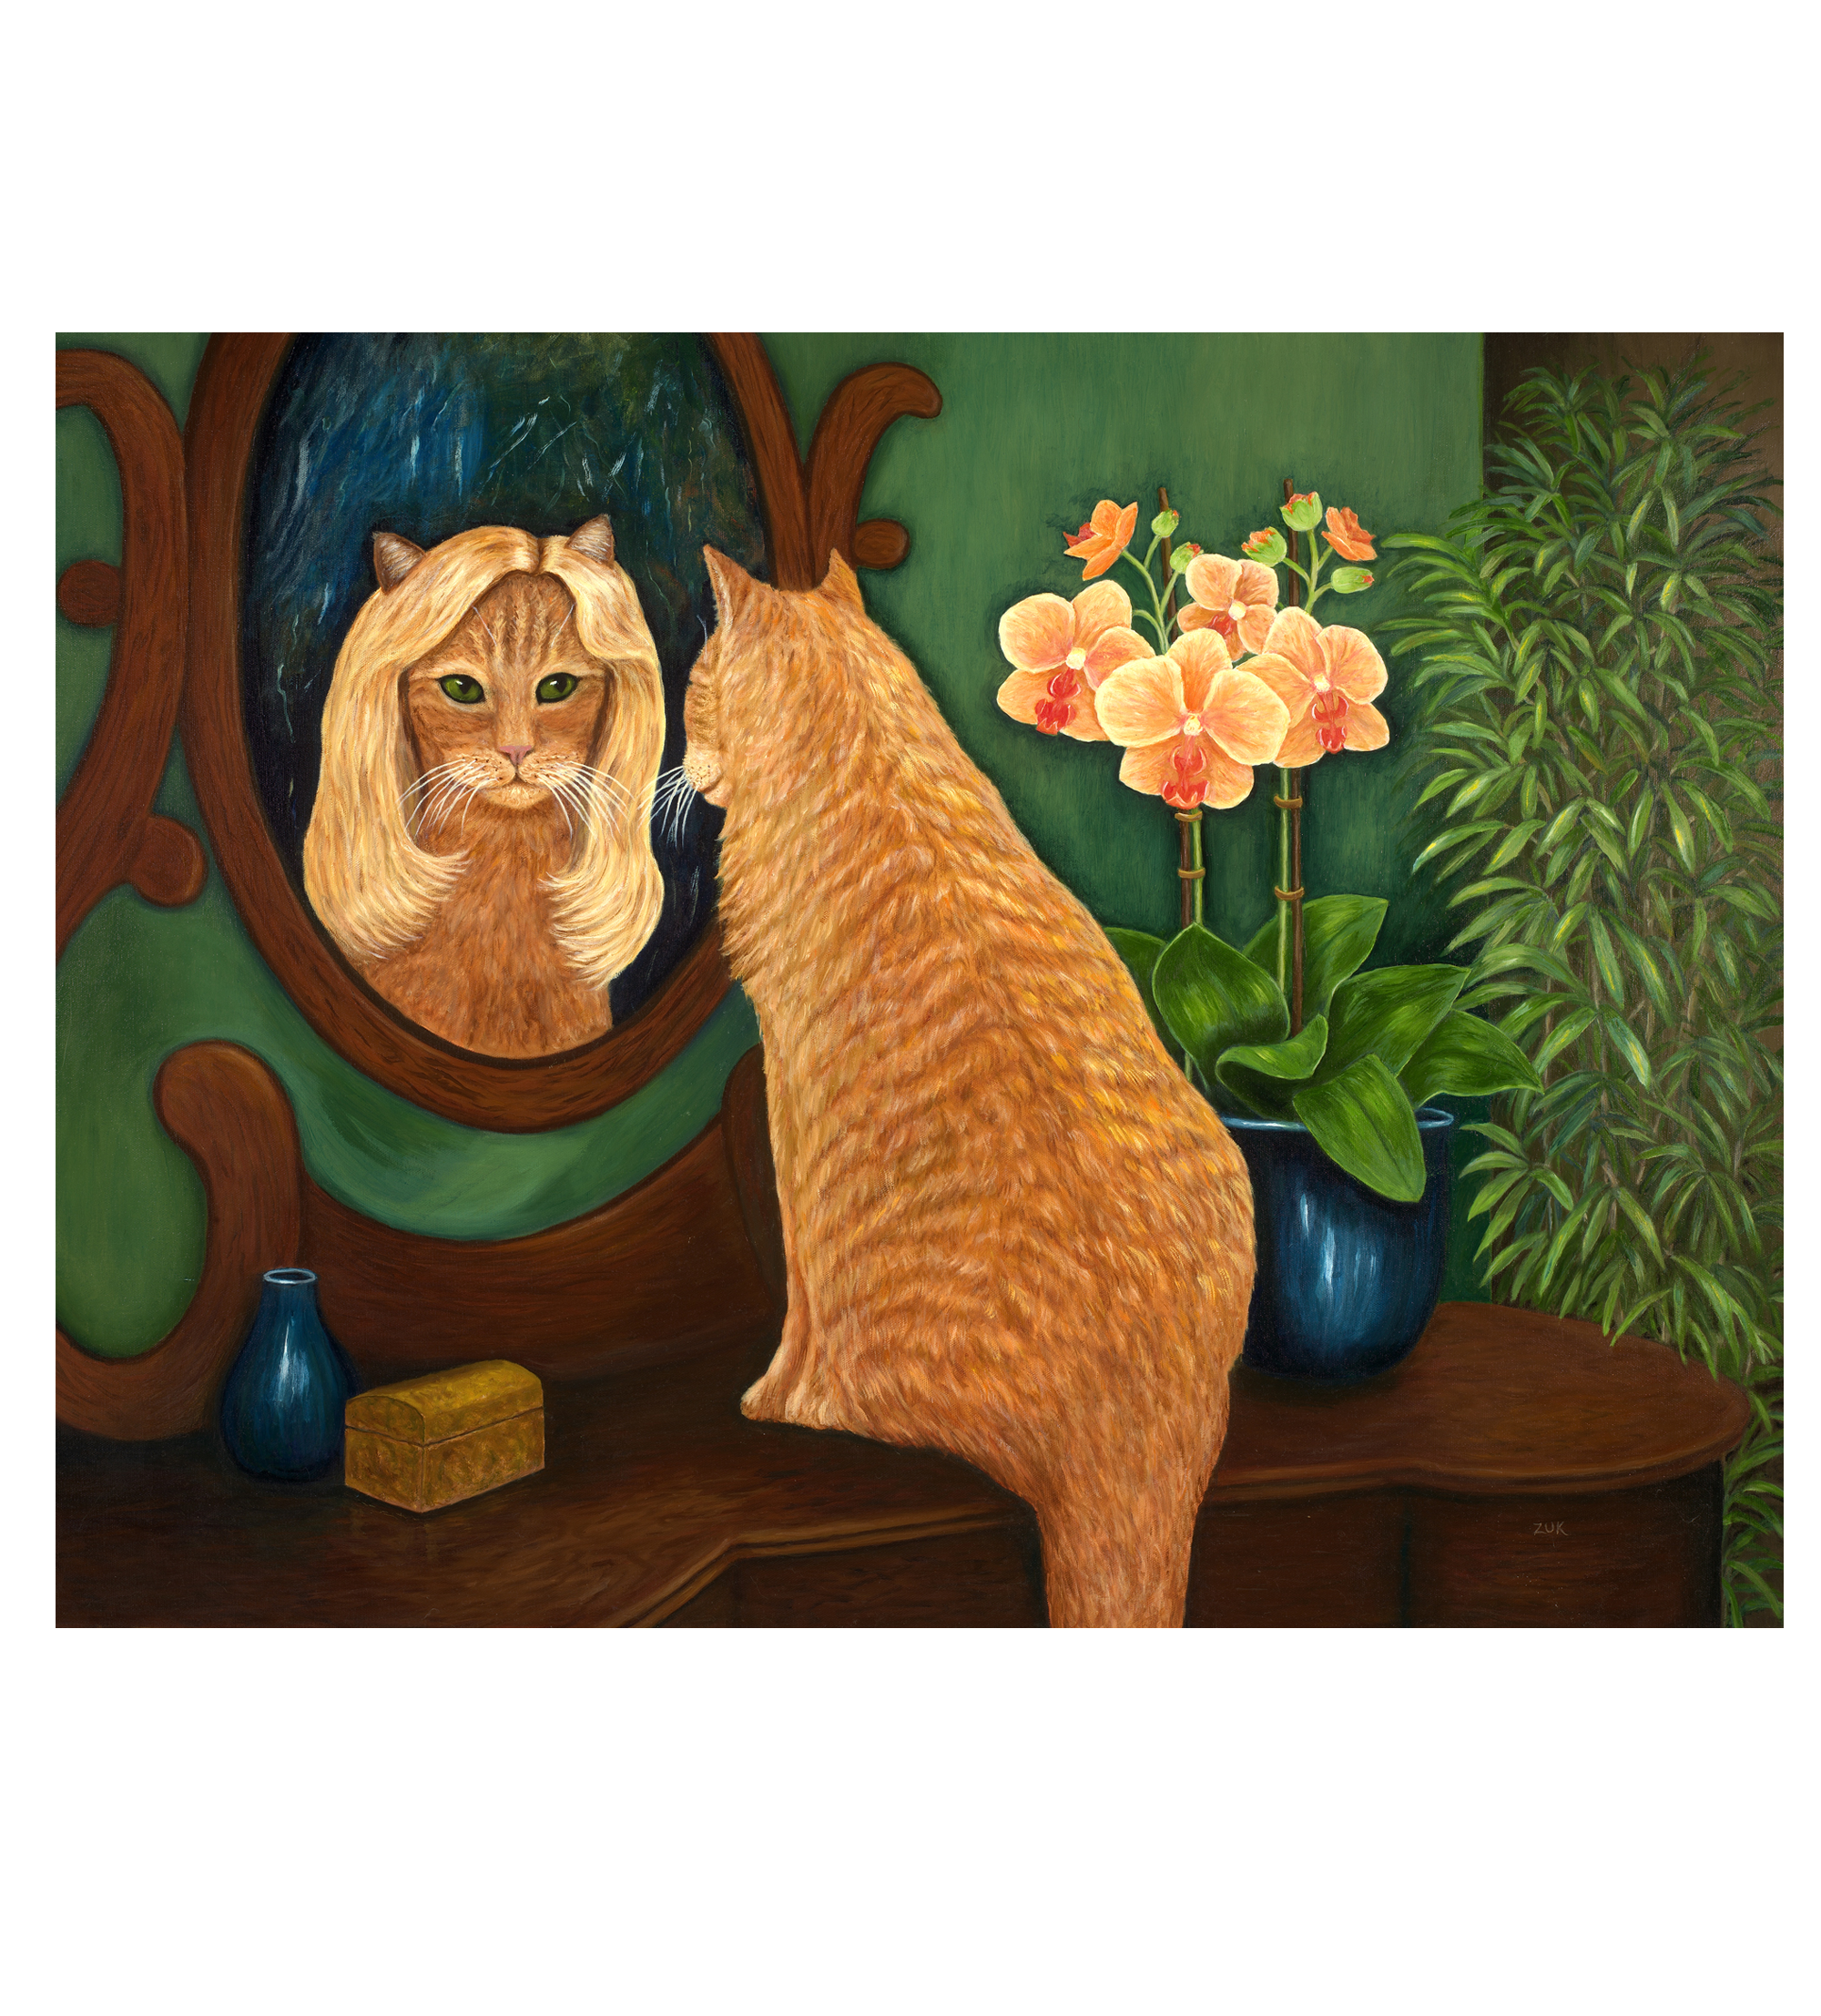 Mirror Mirror on the Wall Giclee